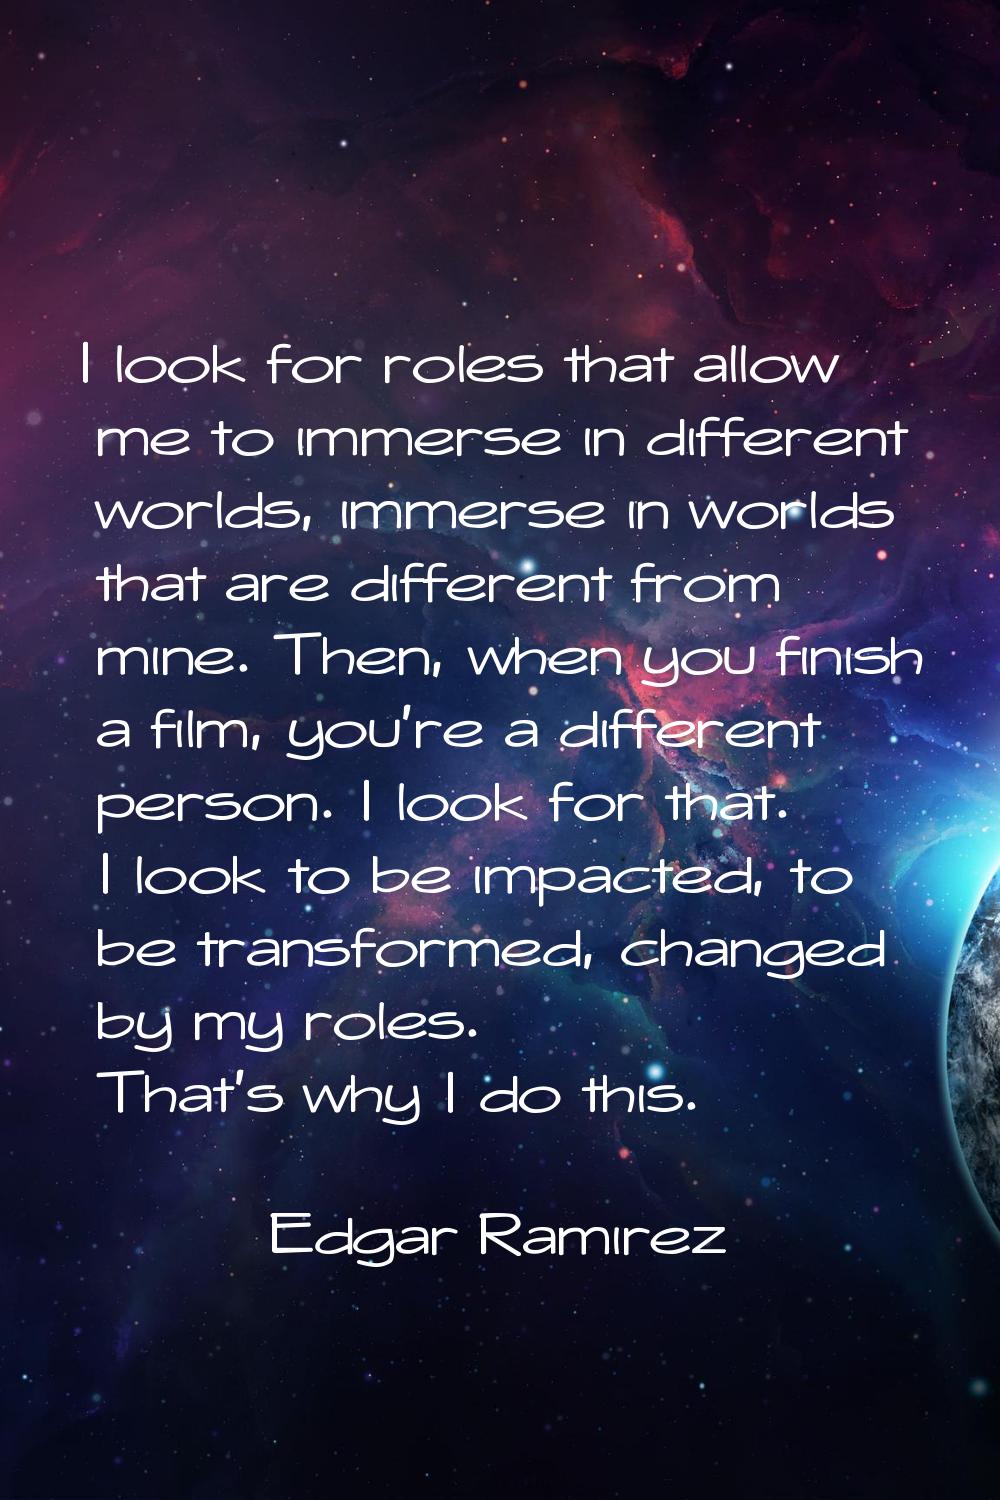 I look for roles that allow me to immerse in different worlds, immerse in worlds that are different